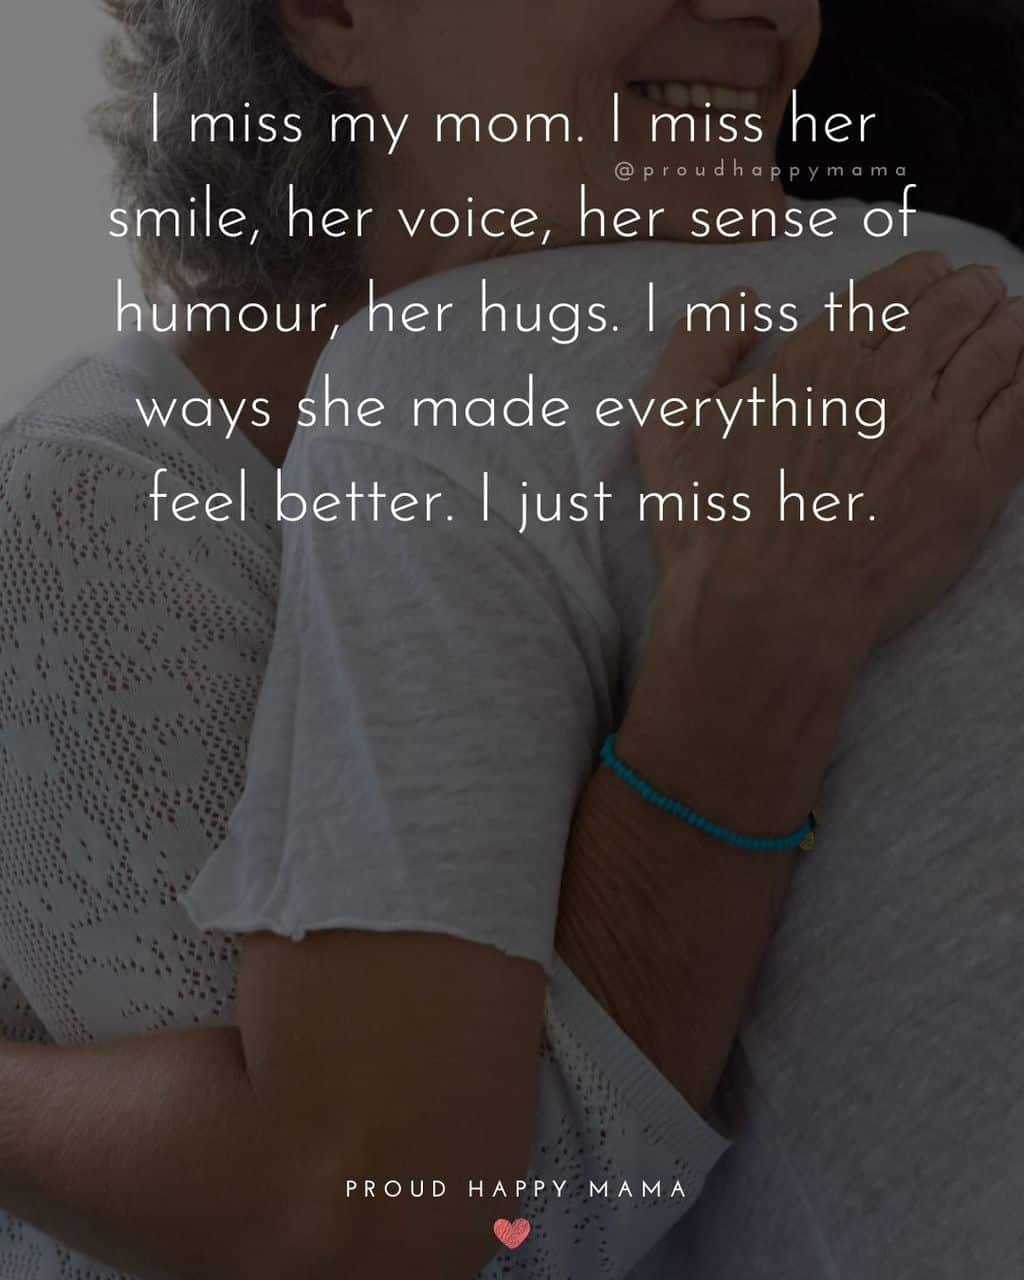 Elderly mother hugging daughter with lost my mom quote text overlay. ‘I miss my mom. I miss her smile, her voice, her sense of humor, her hugs. I miss the ways she made everything feel better. I just miss her.’